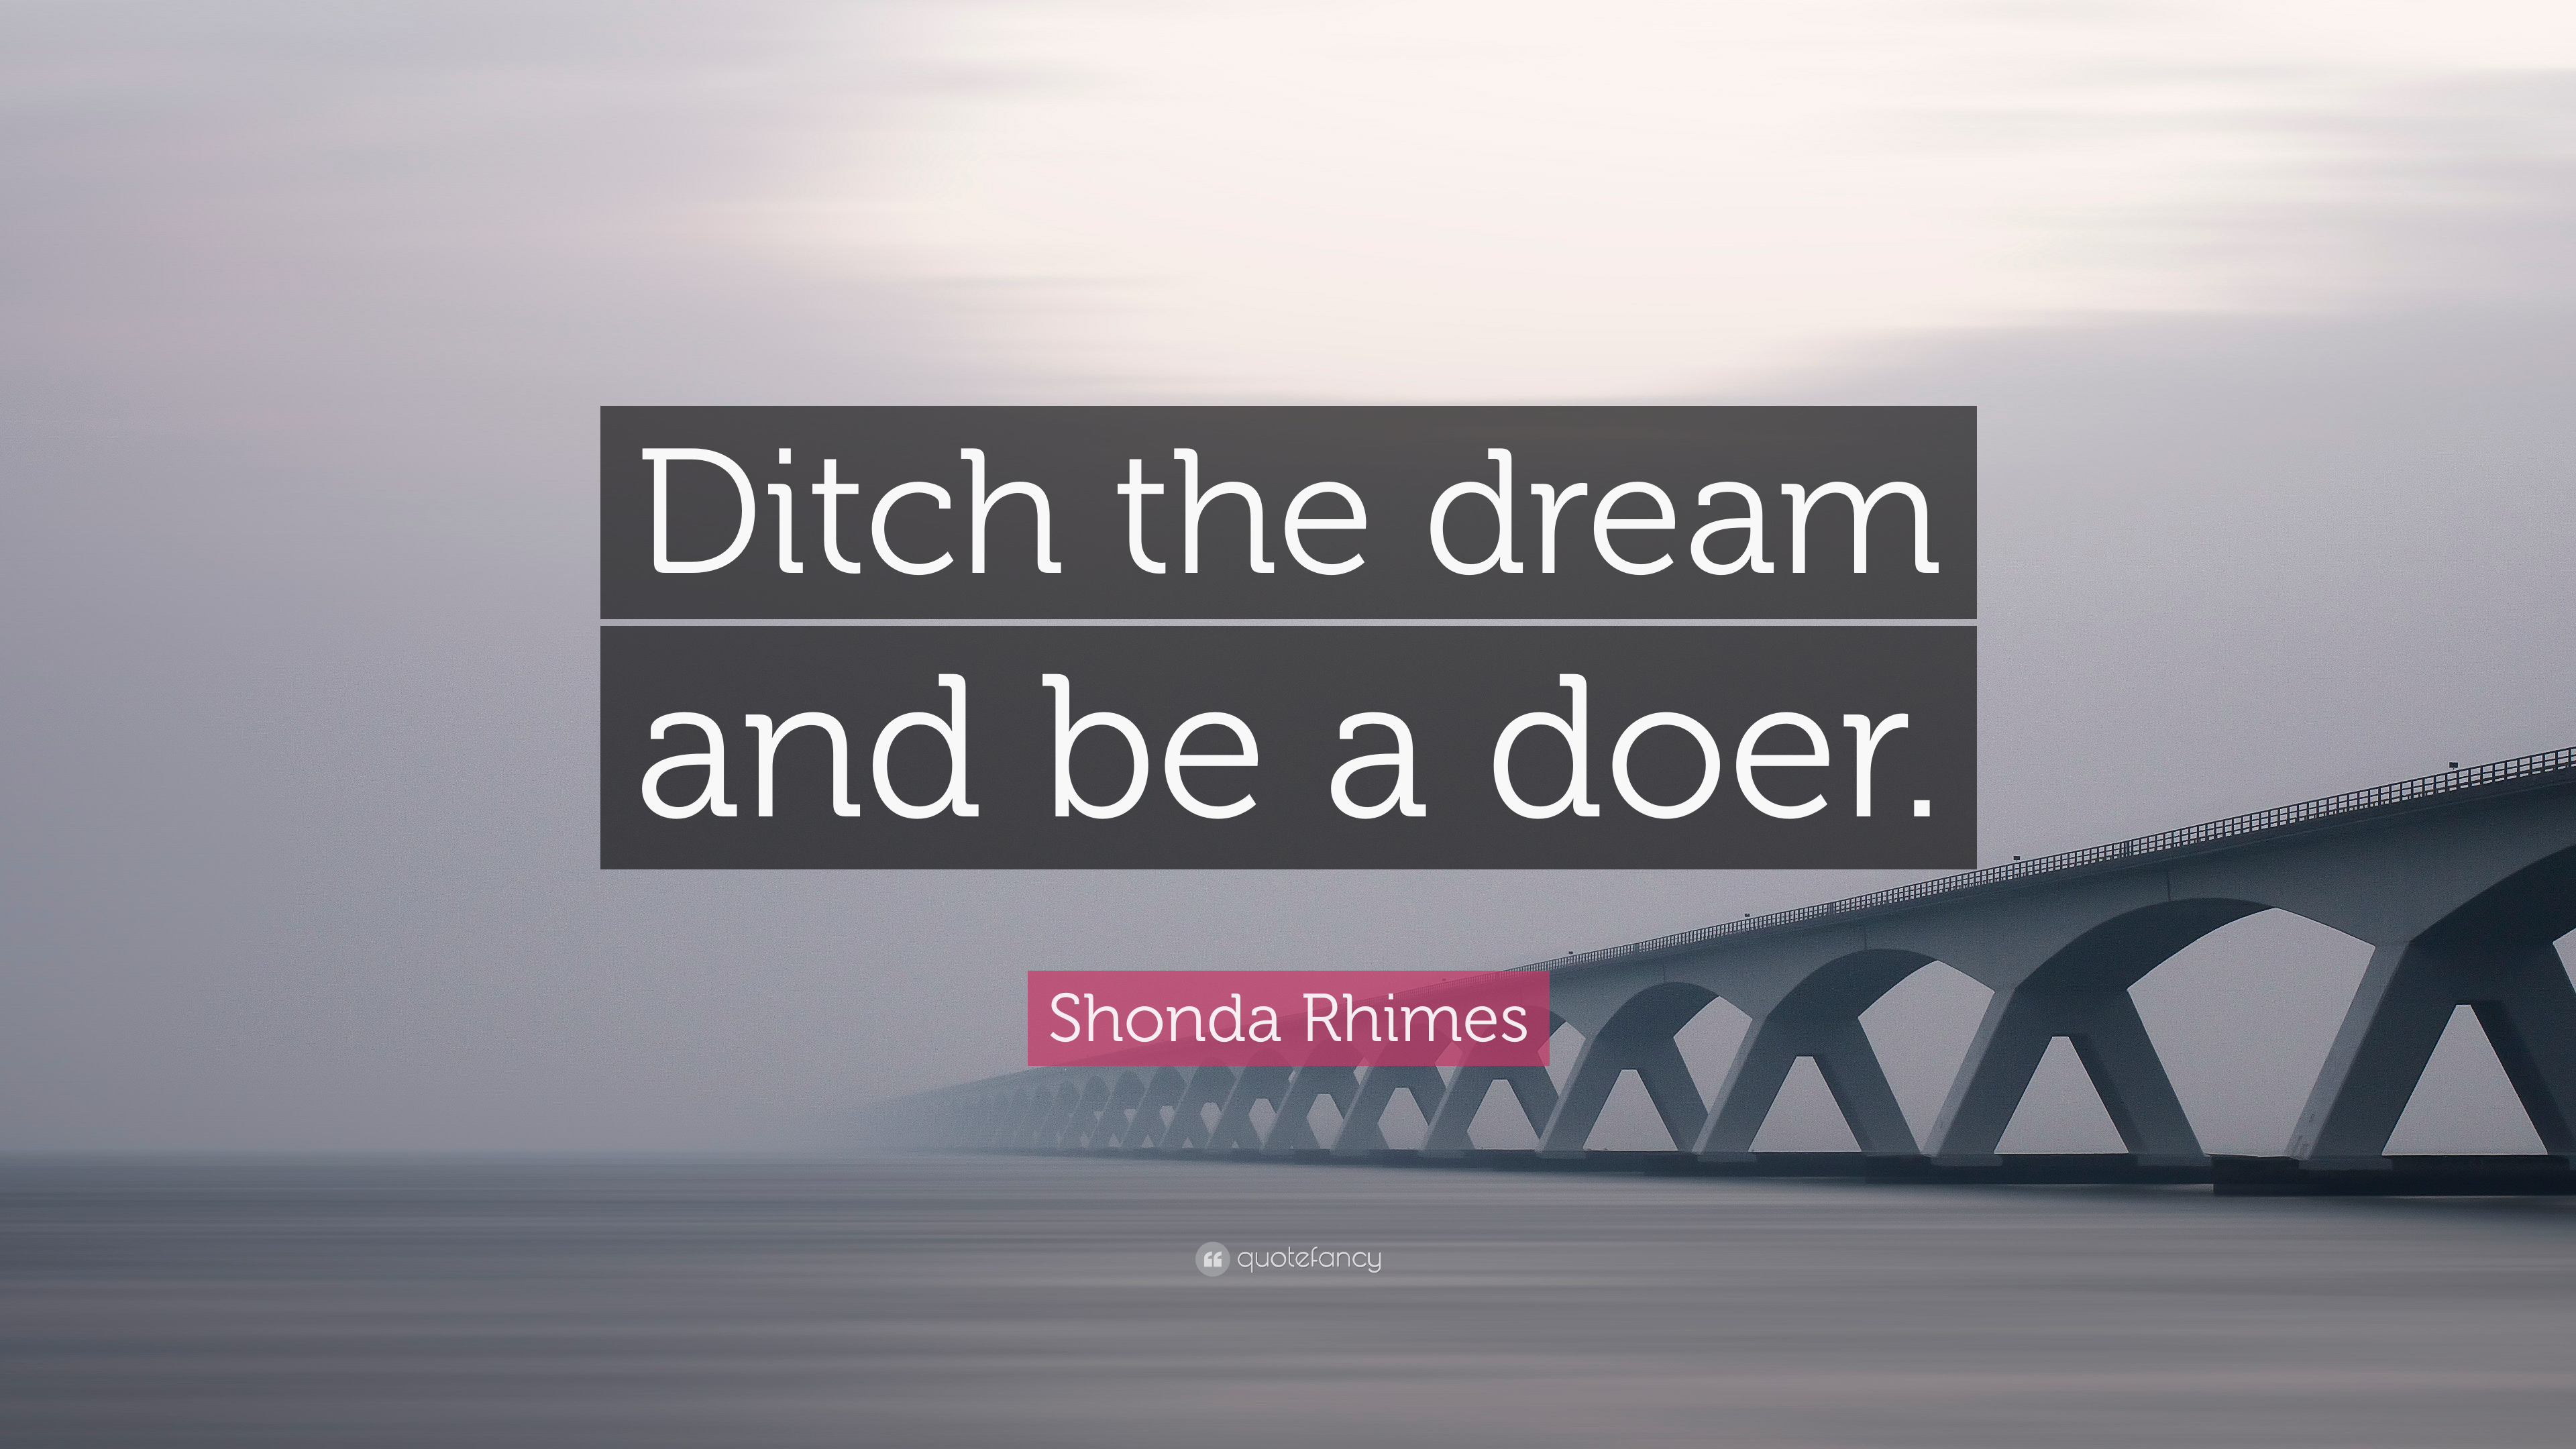 Shonda Rhimes Quote: “Ditch the dream and be a doer.” 9 wallpaper